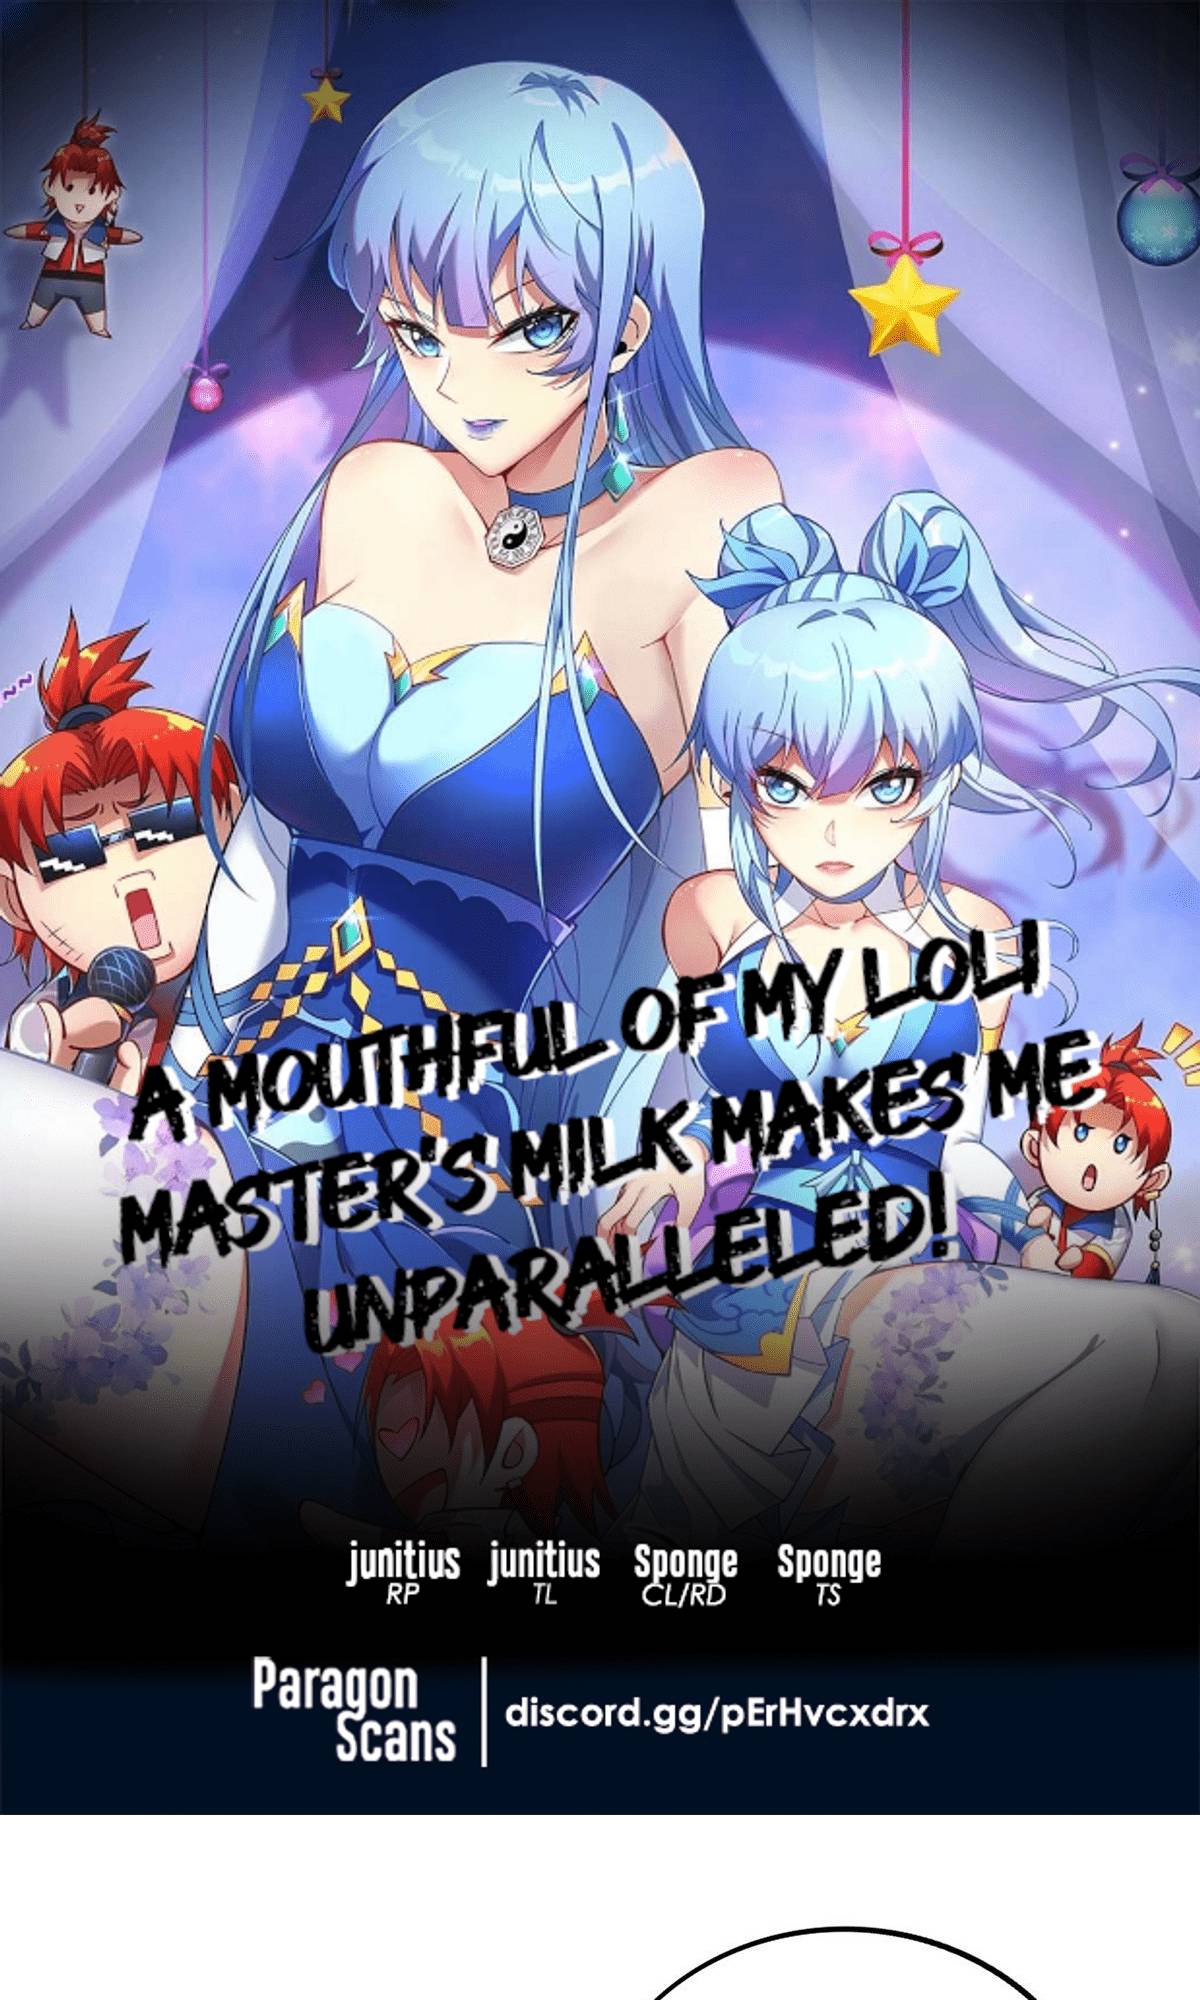 A Mouthful of My Loli Master's Milk Makes Me Unparalleled - chapter 22 - #1